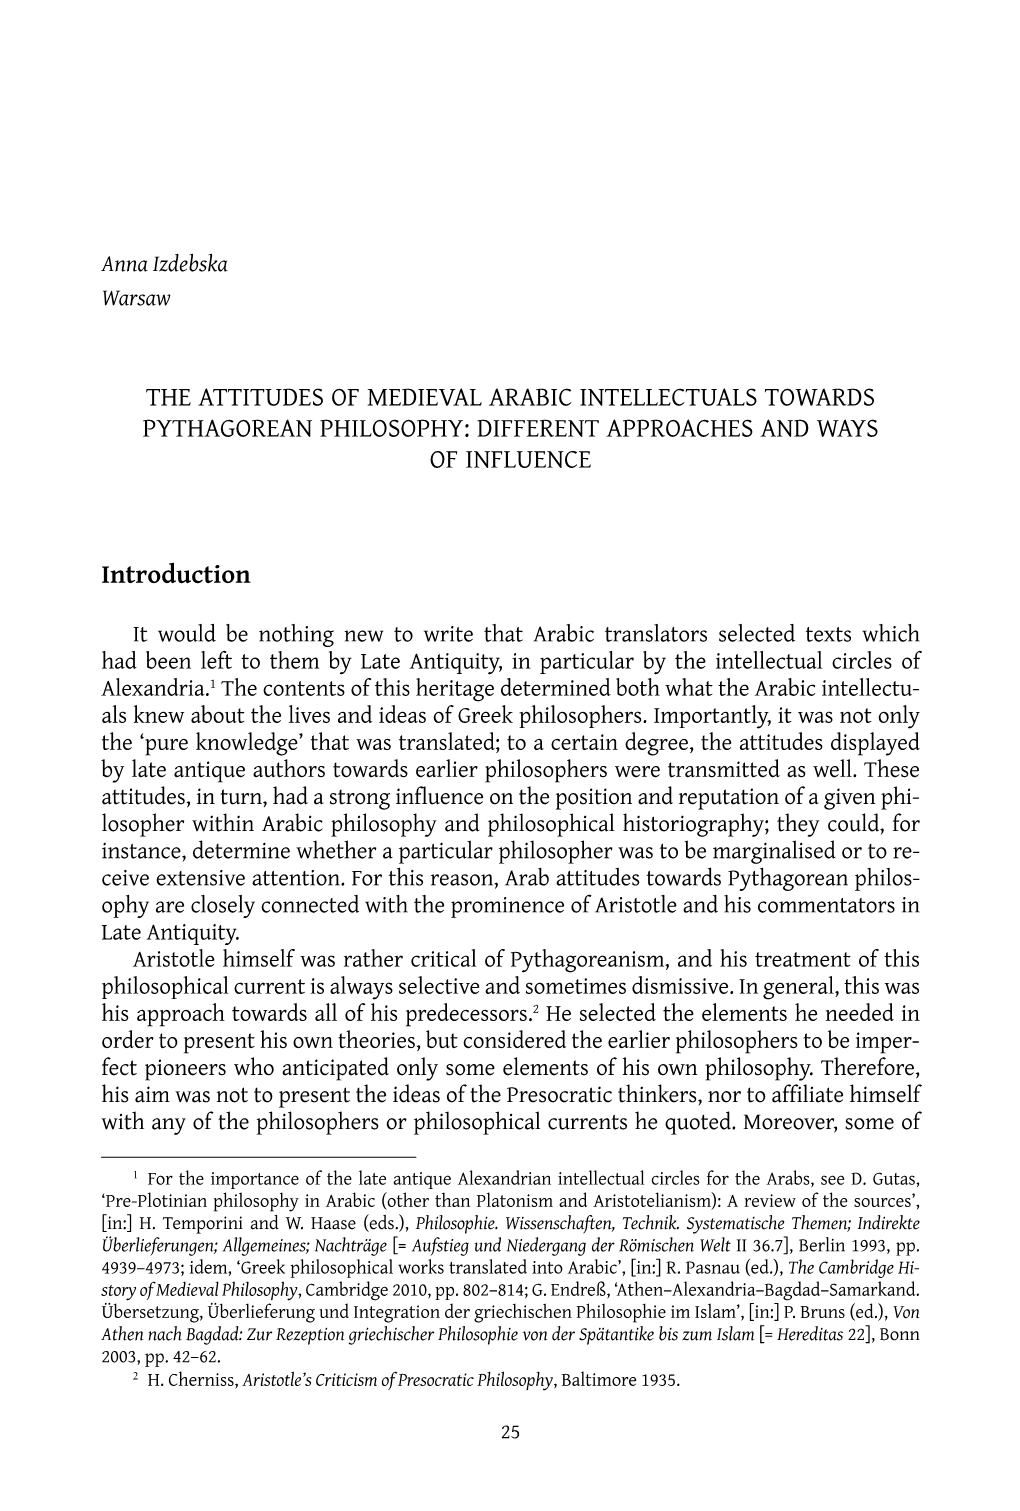 The Attitudes of Medieval Arabic Intellectuals Towards Pythagorean Philosophy: Different Approaches and Ways of Influence